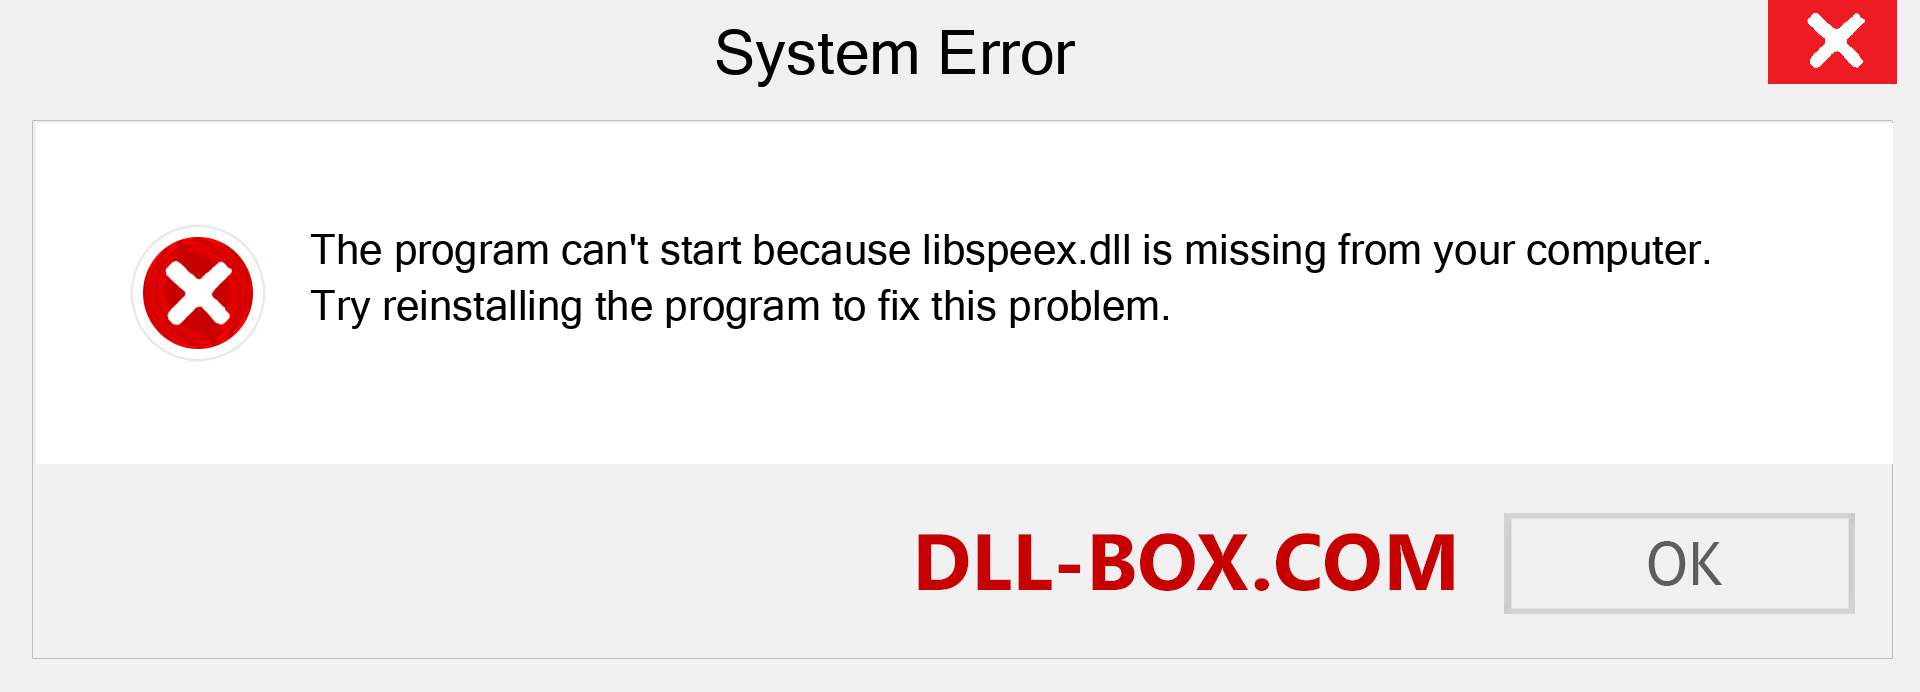  libspeex.dll file is missing?. Download for Windows 7, 8, 10 - Fix  libspeex dll Missing Error on Windows, photos, images